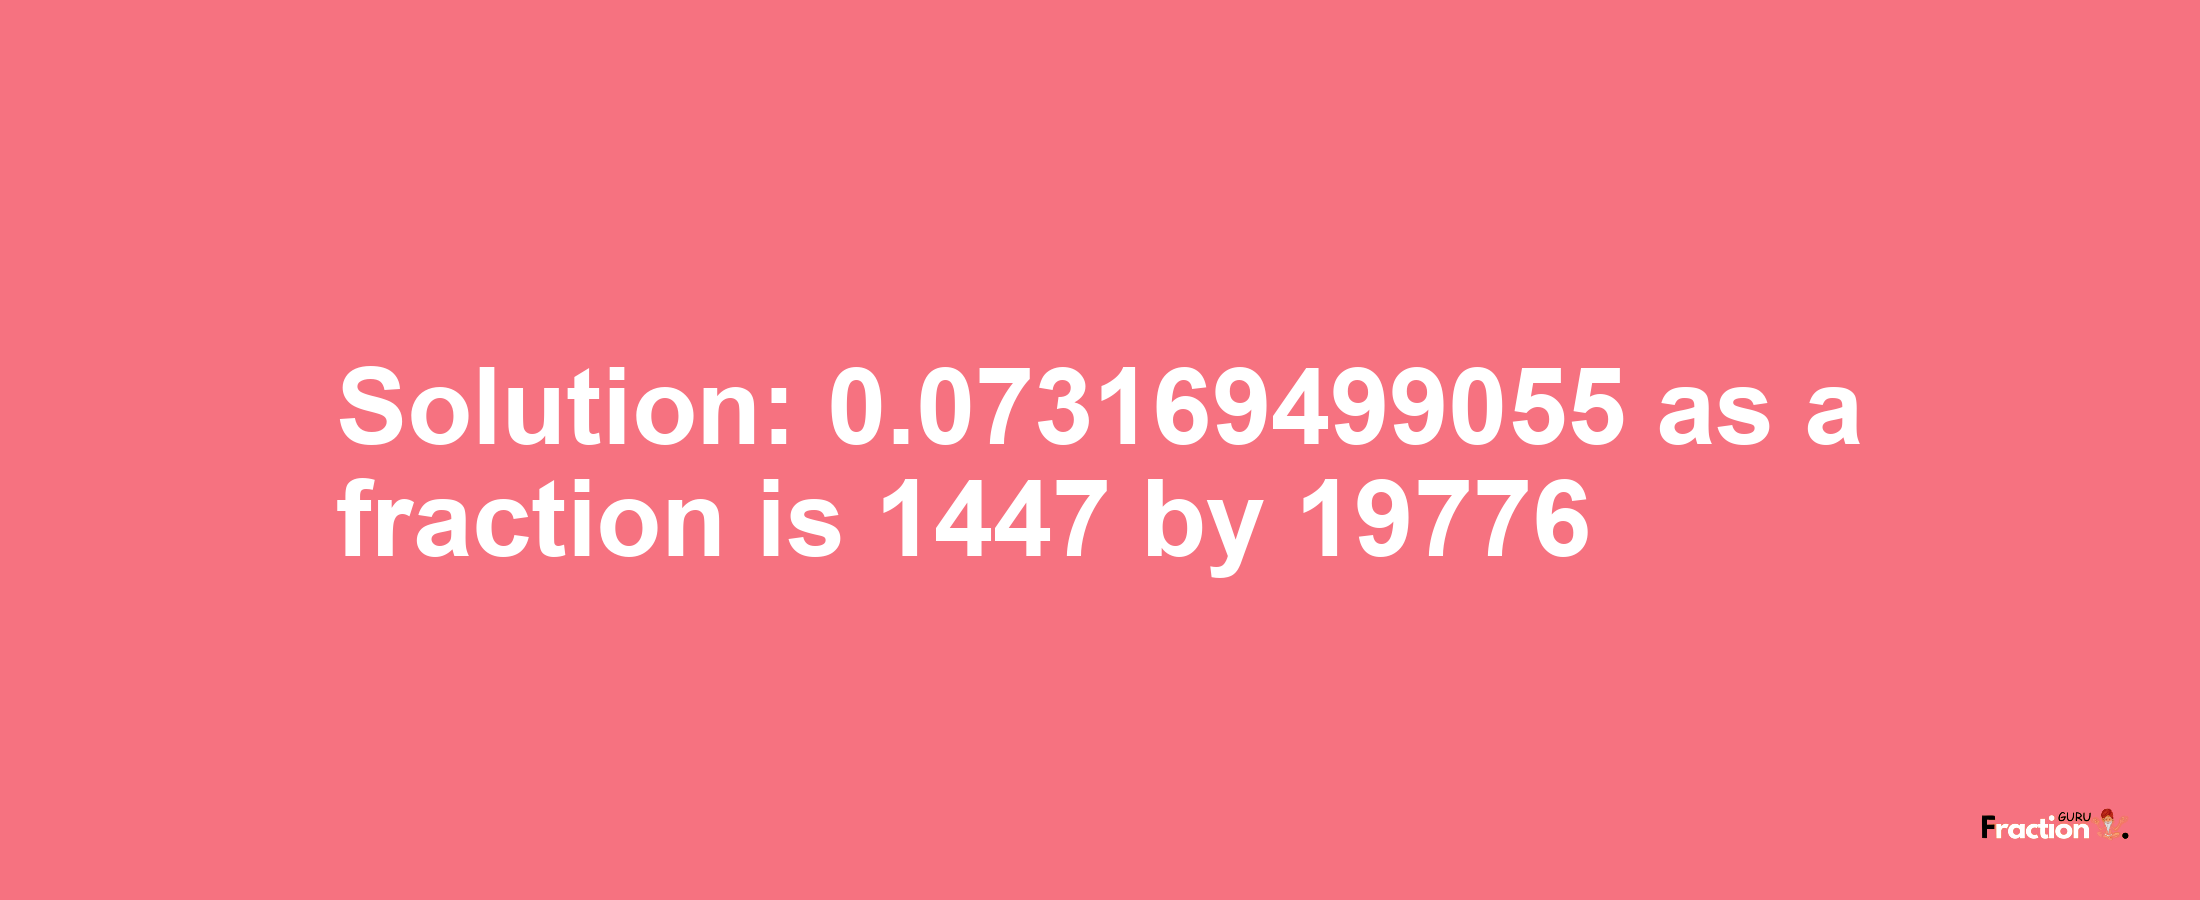 Solution:0.073169499055 as a fraction is 1447/19776